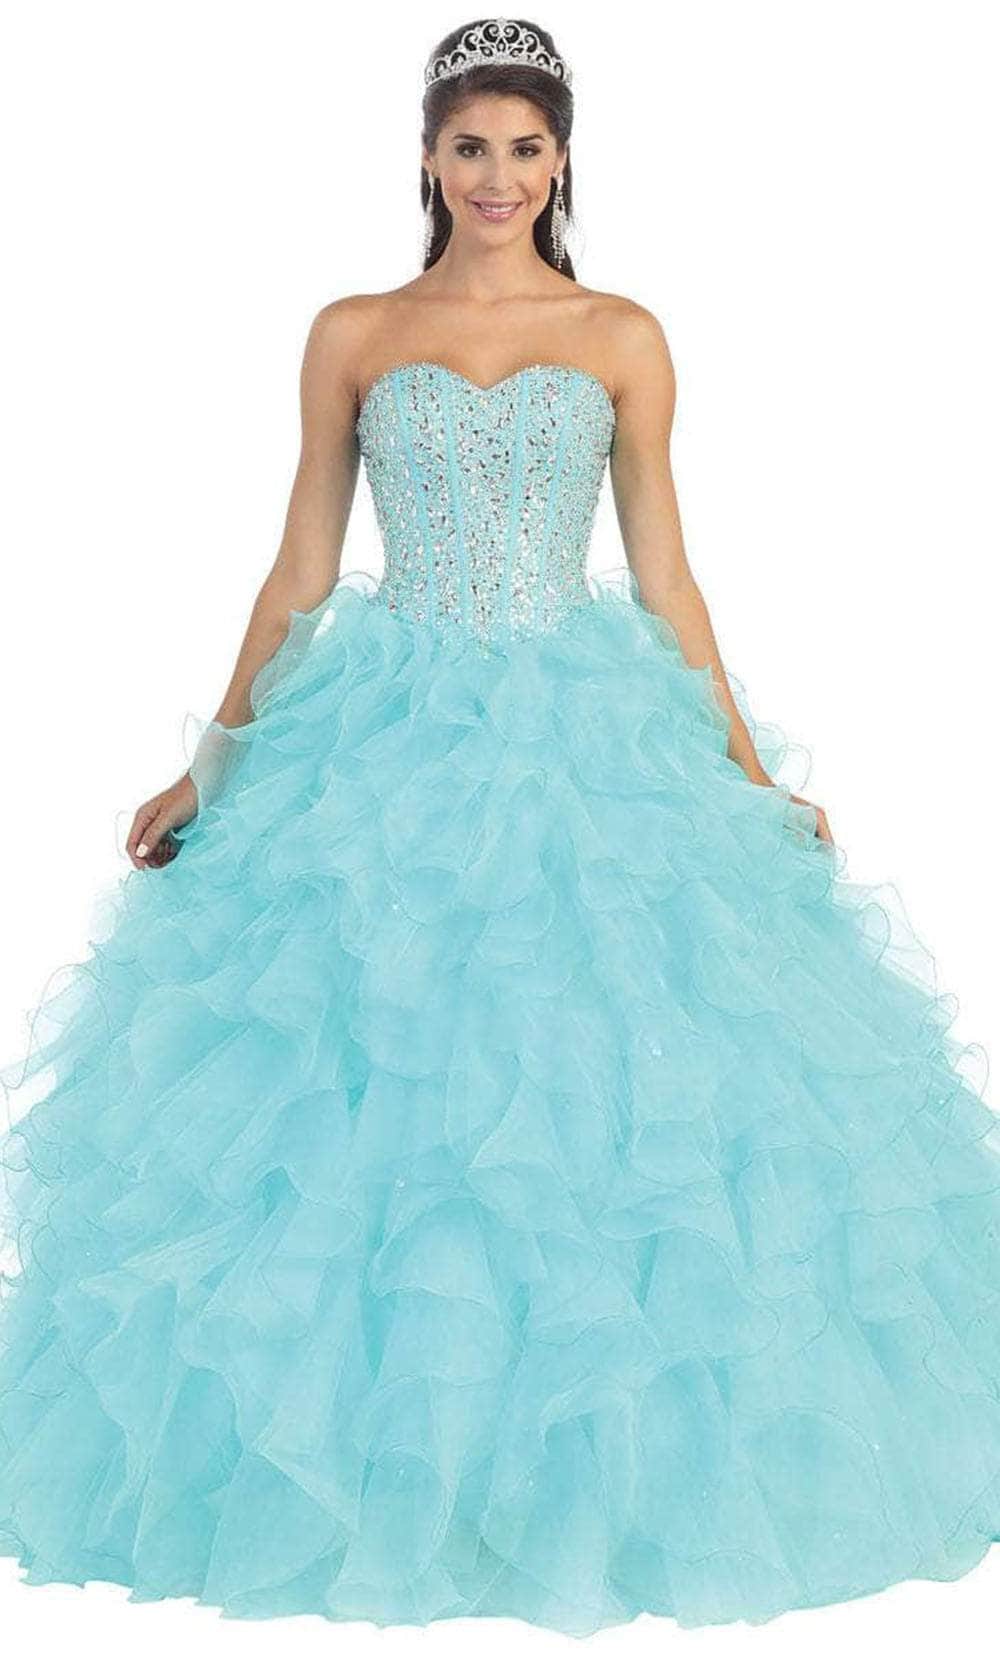 May Queen LK39 - Jeweled Corset Ballgown